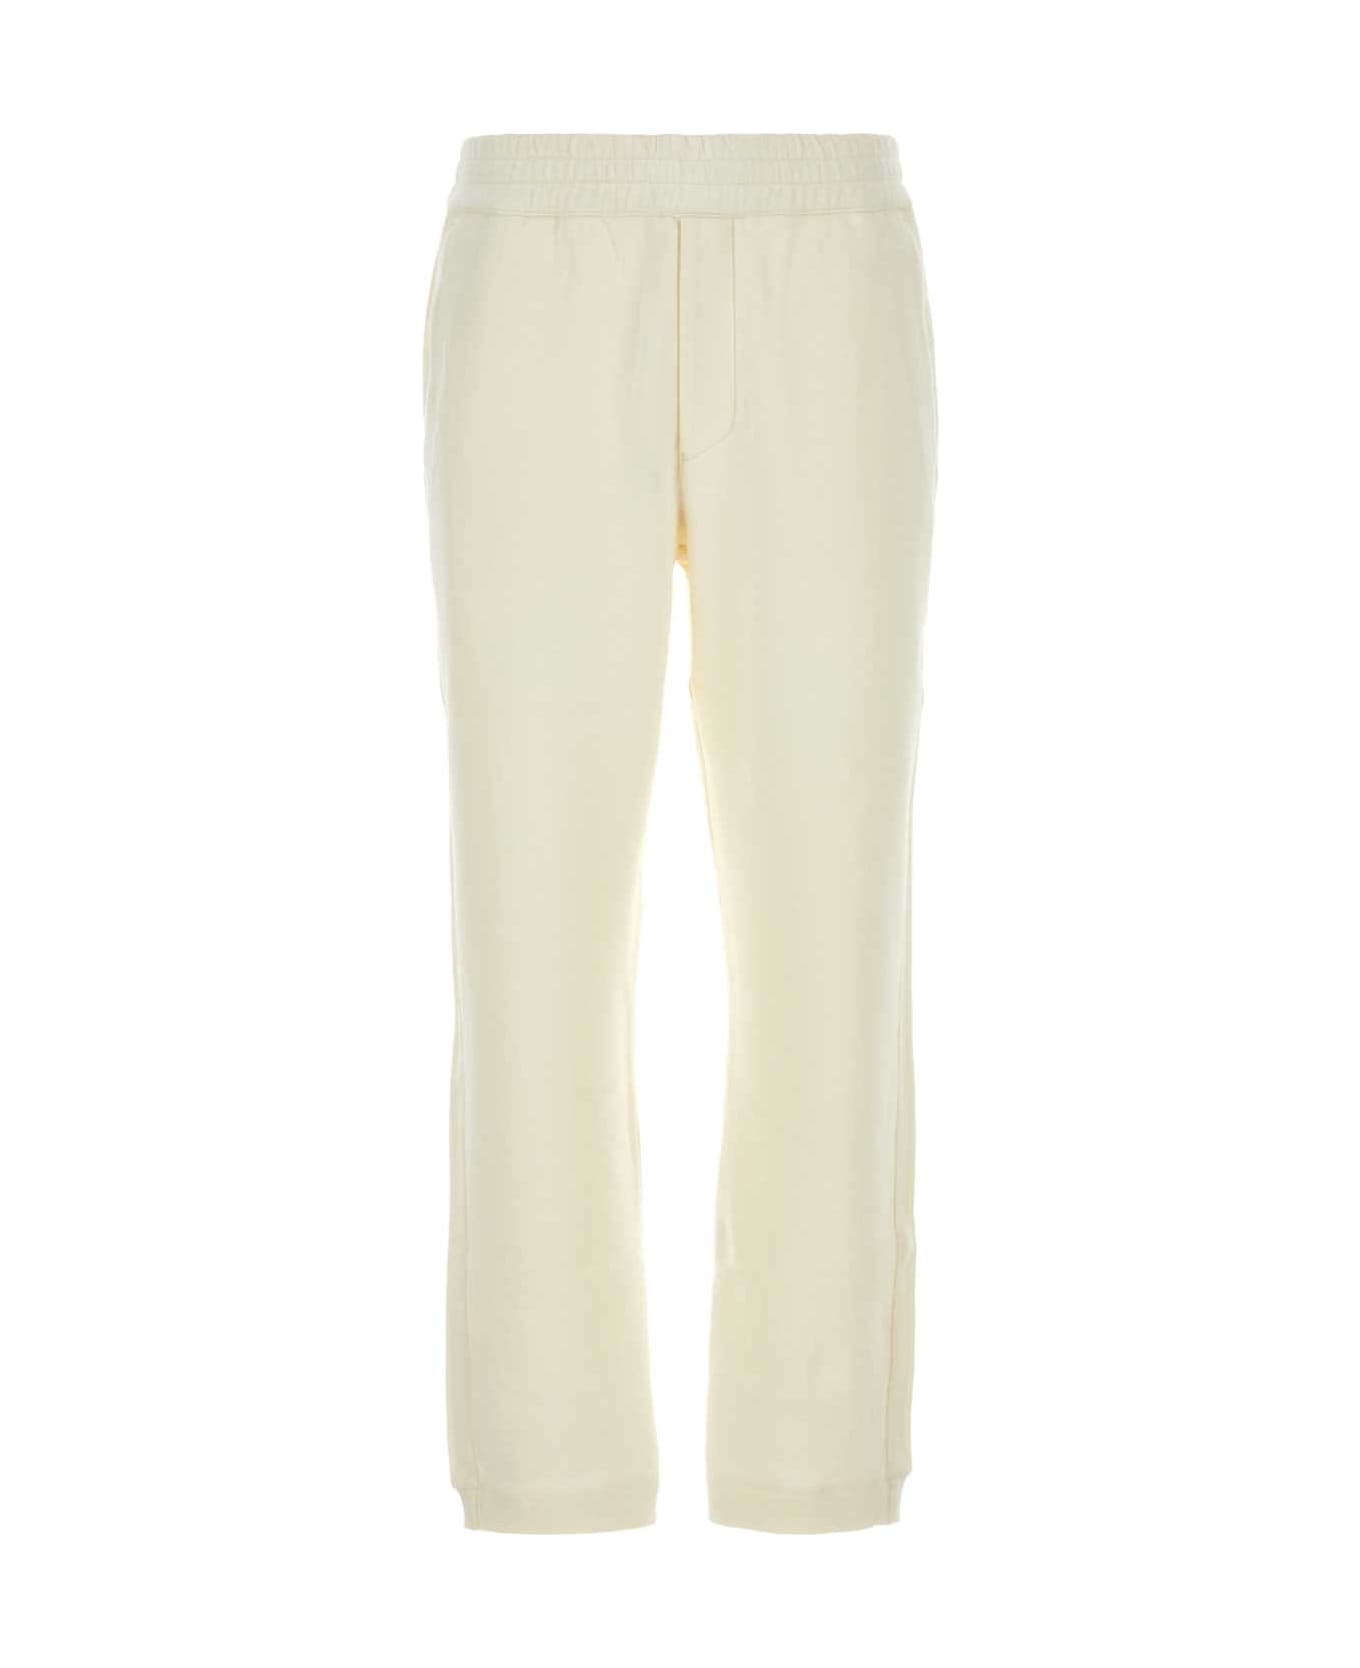 Zegna Ivory Cotton Blend Joggers - N01 ボトムス